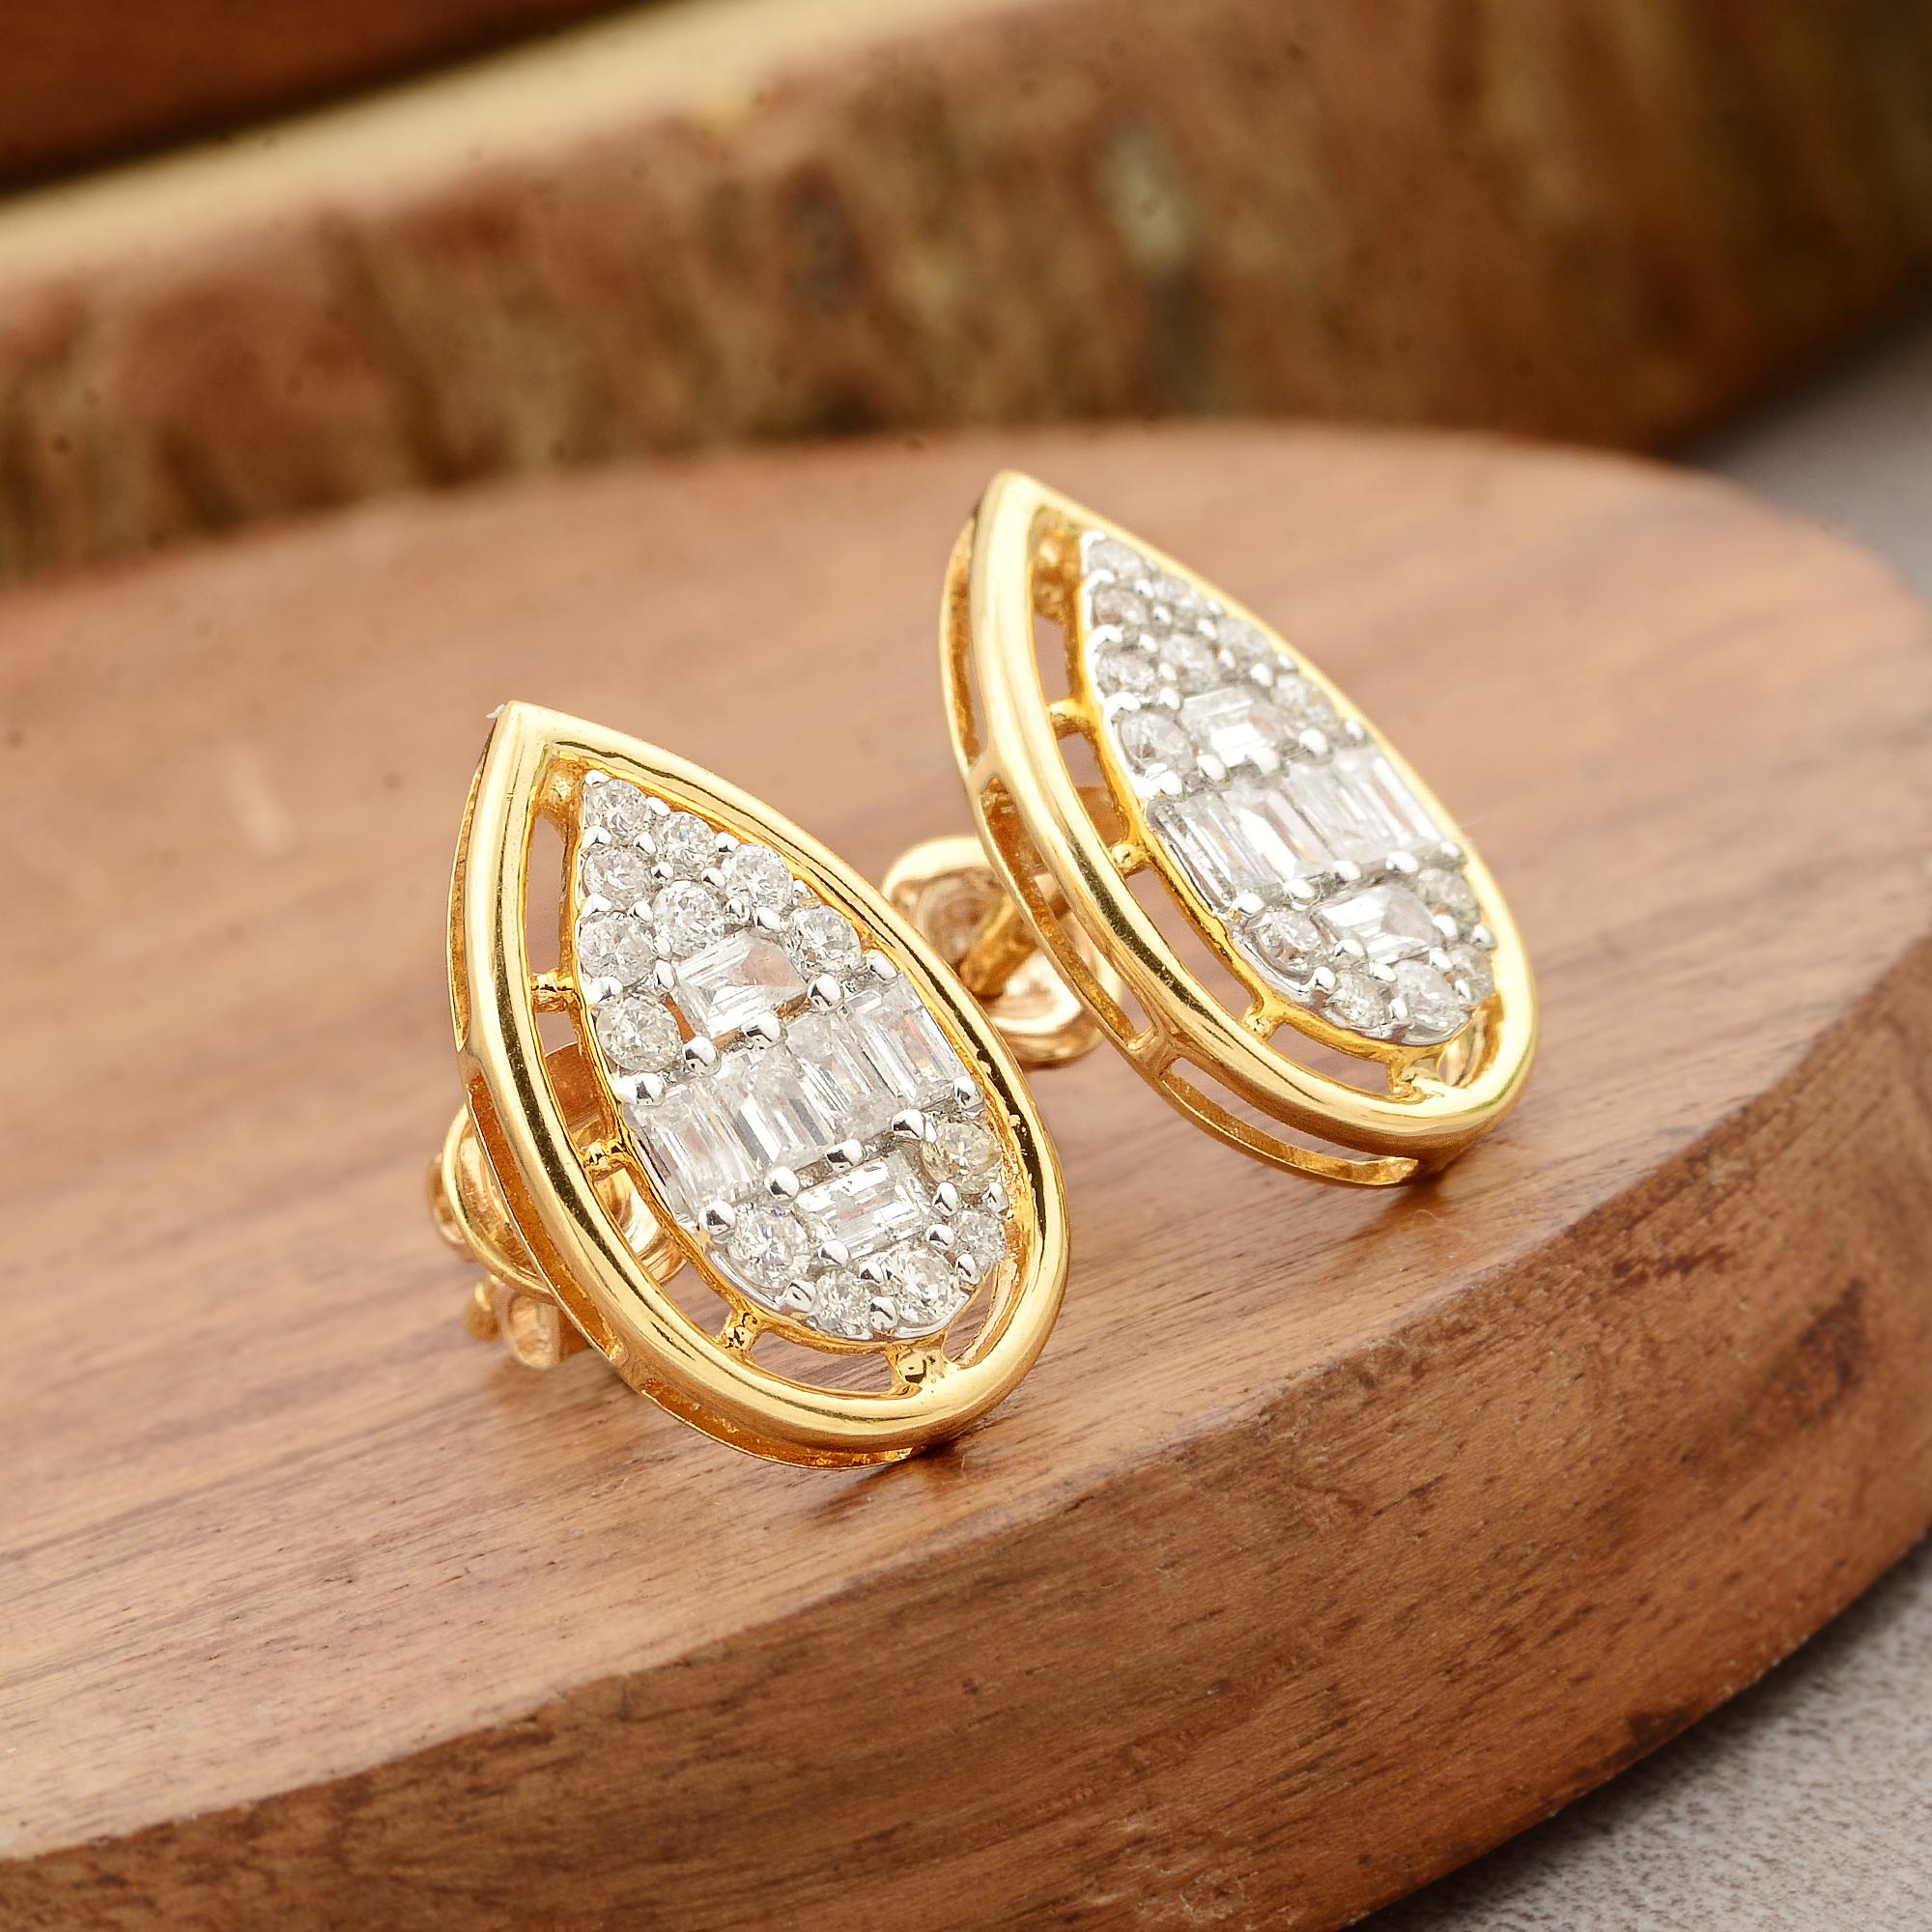 Item Code :- STE-1024B
Gross Wt. :- 3.21 gm
10k Yellow Gold Wt. :- 3.05 gm
Diamond Wt. :- 0.80 Ct. ( AVERAGE DIAMOND CLARITY SI1-SI2 & COLOR H-I )
Earrings Size :- 16 mm approx.
✦ Sizing
.....................
We can adjust most items to fit your